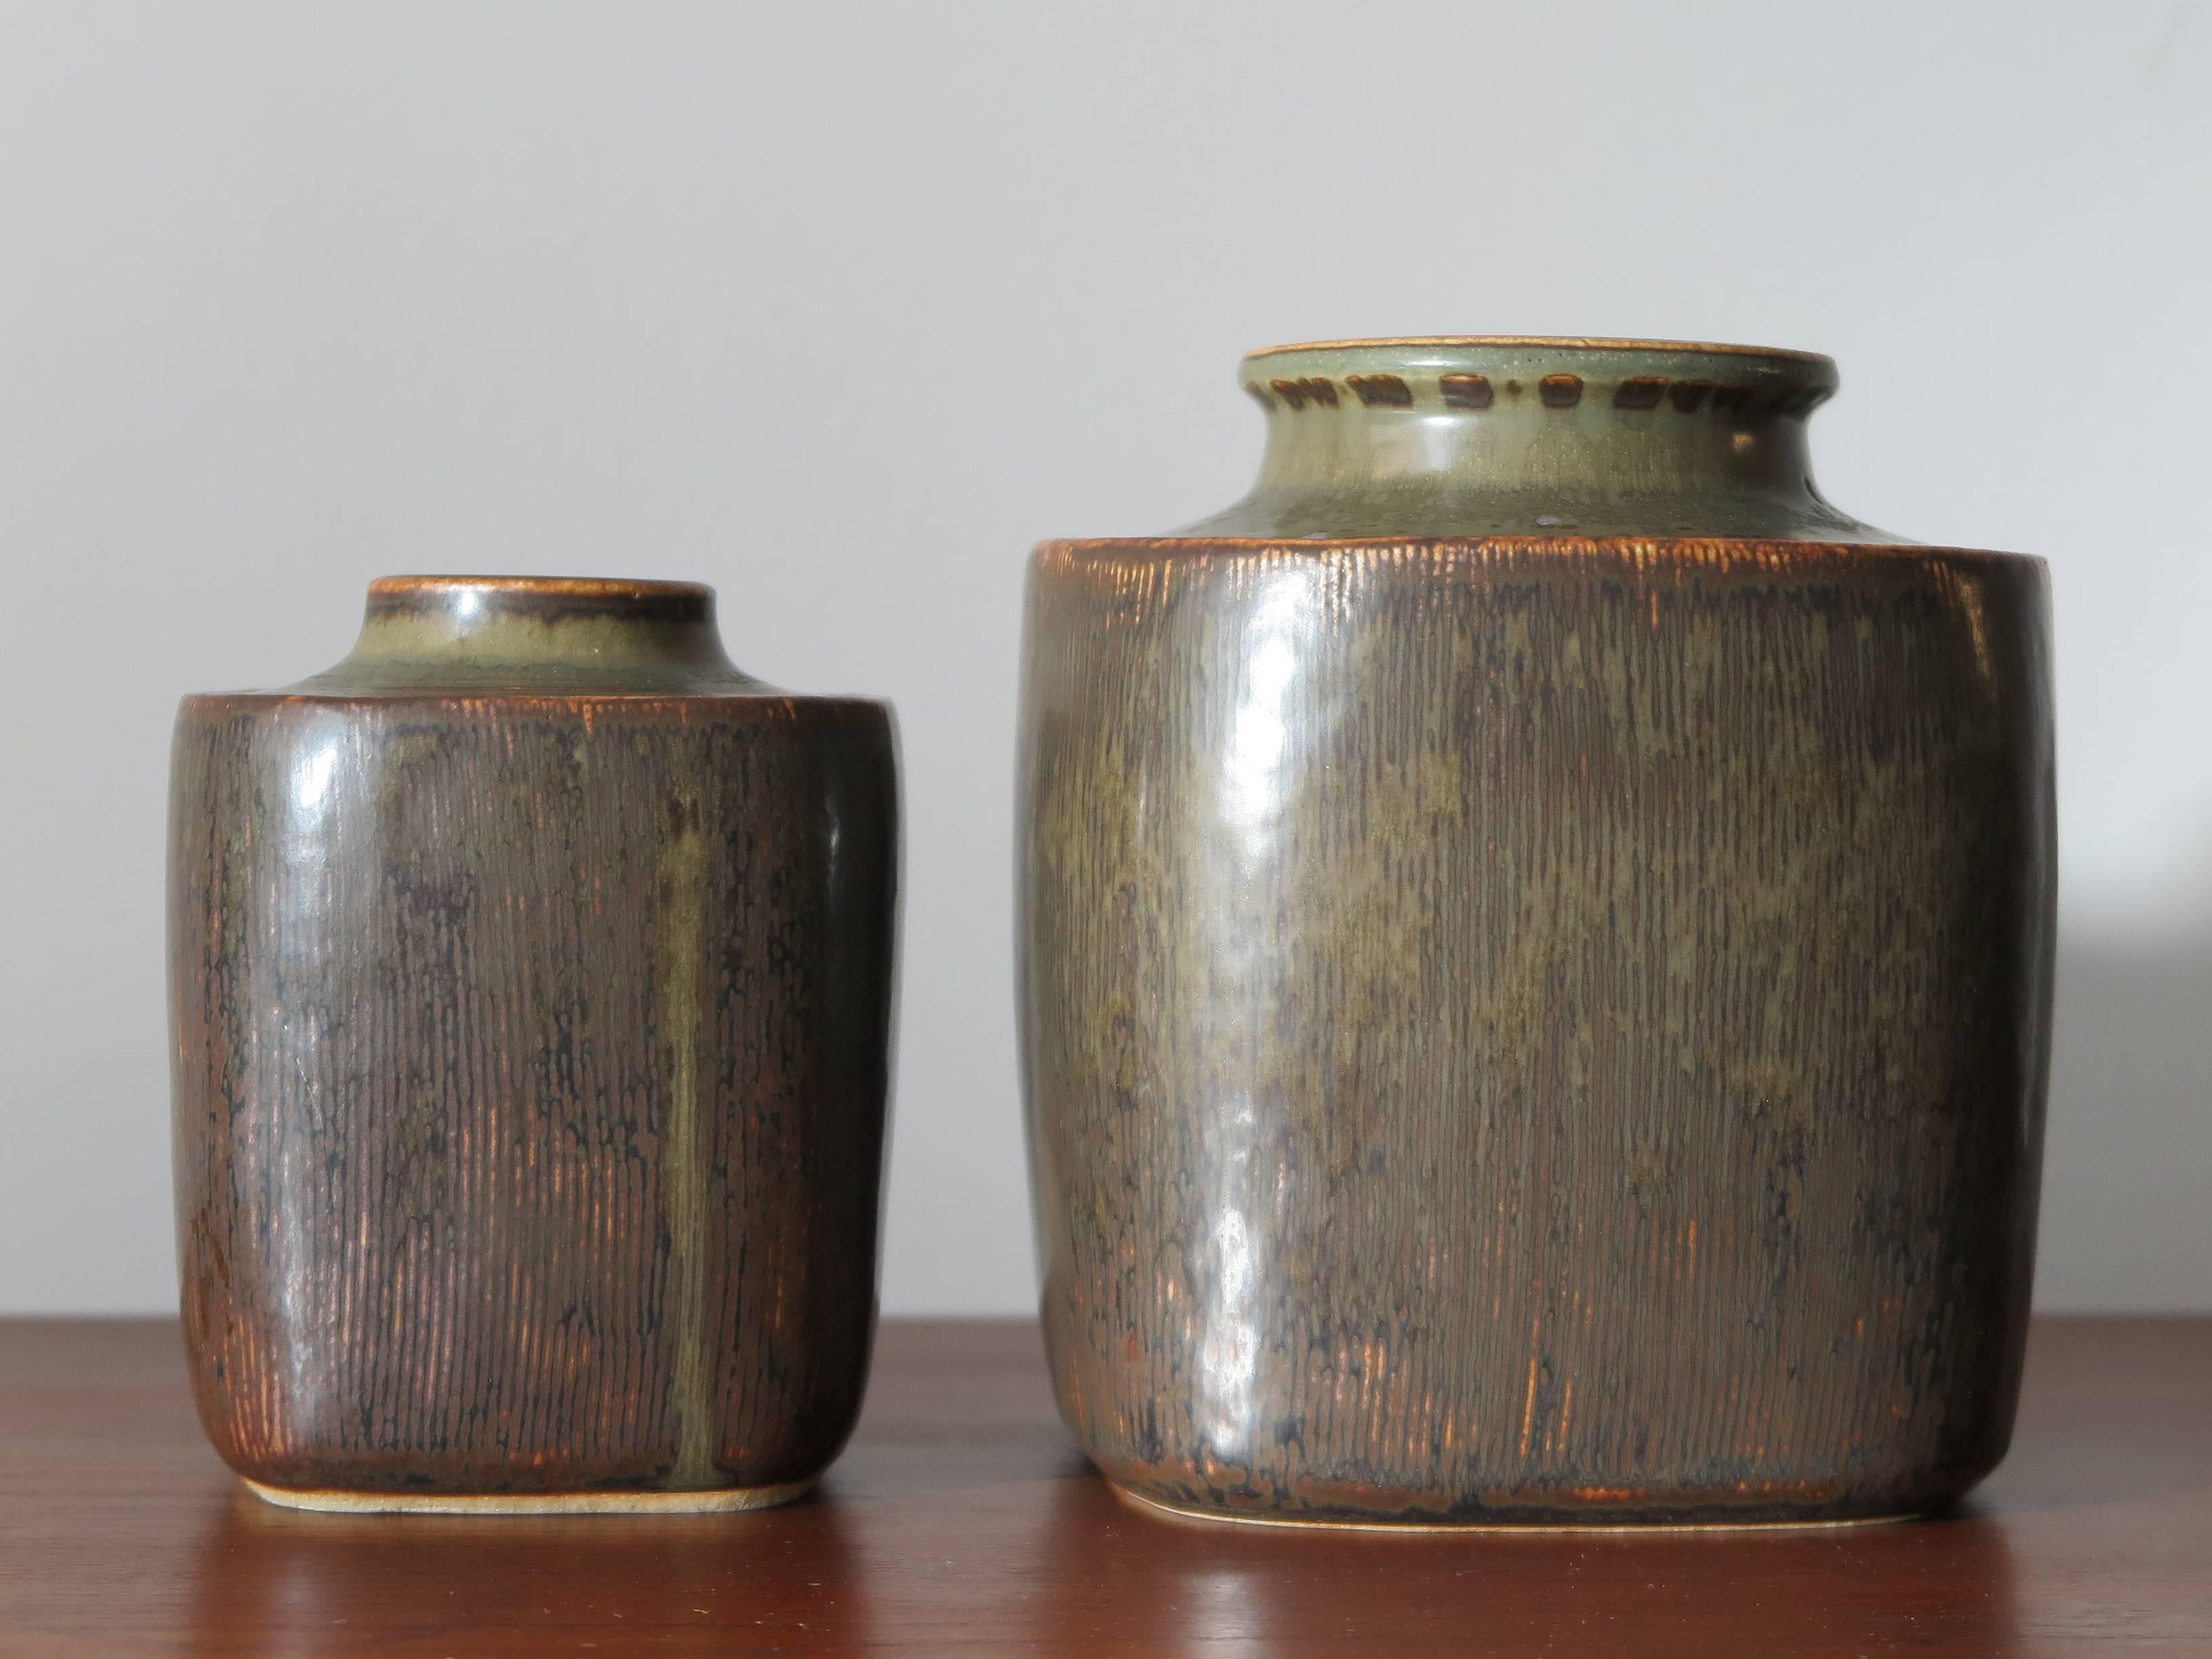 Set of two vintage Scandinavian stoneware amazing big vases designed by the Danish artist Valdemar Petersen for Bing & Grondahl from the 1960s in Copenhagen with matt glazed and with signature engraved on the bottom.
Measurement:
- Medium vase H.